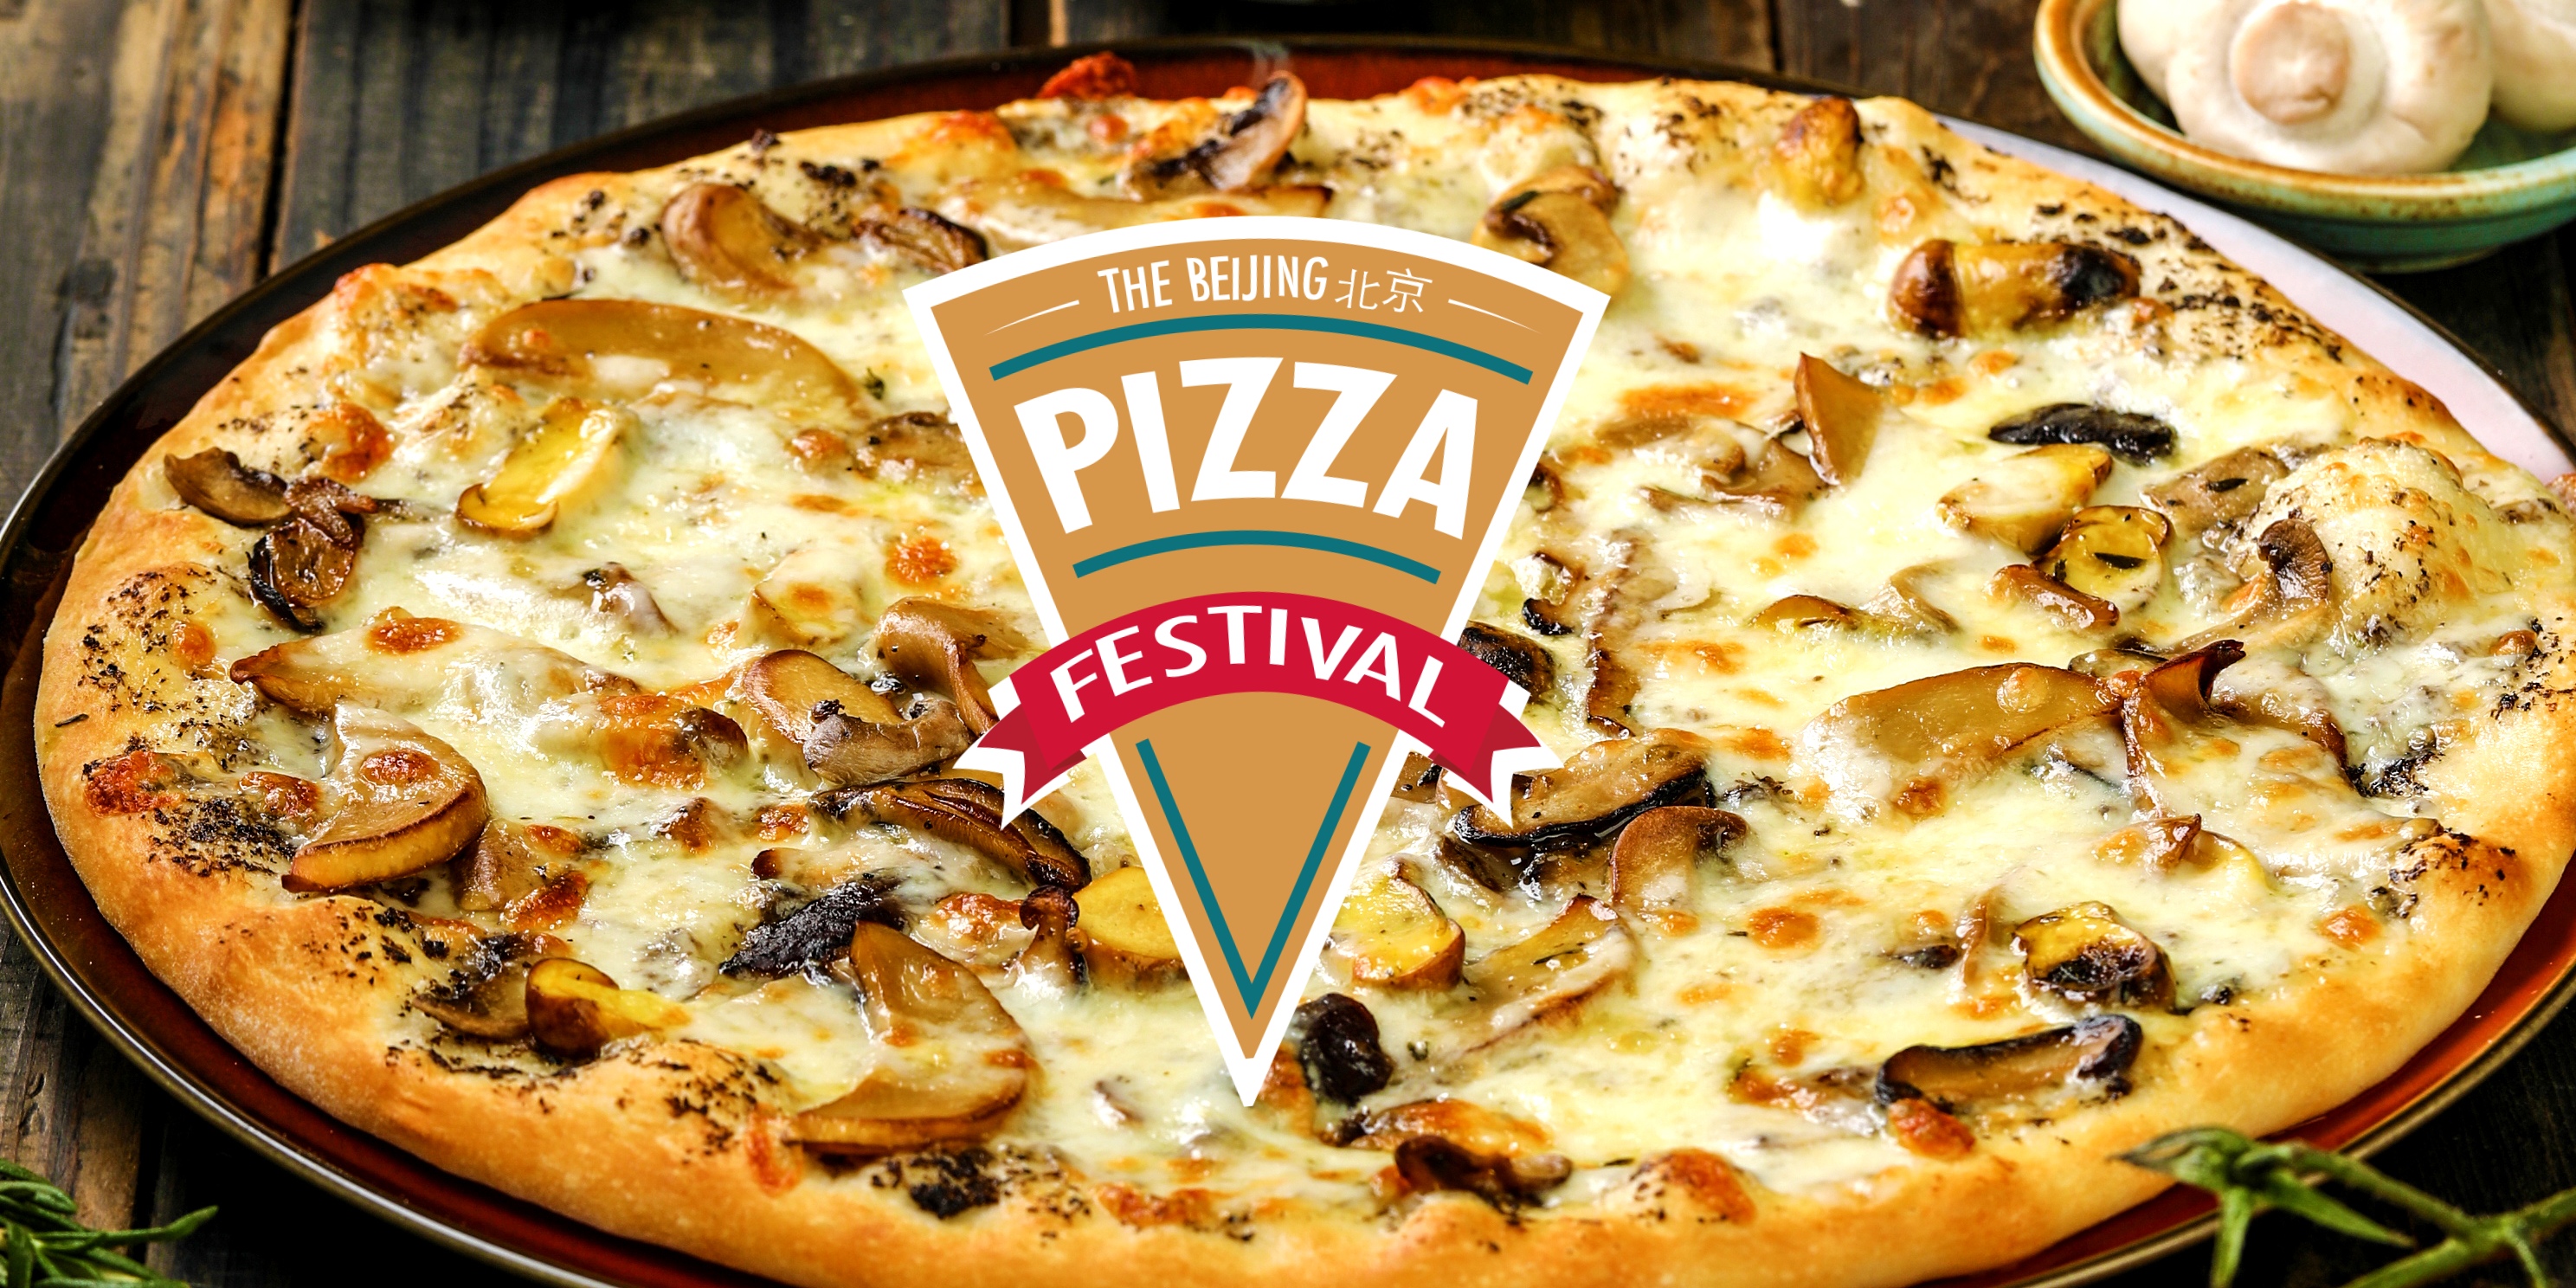 You Wanna Pizza This? Vegan, Vegetarian, Halal and Gluten-Free Options at This Weekend&#039;s Festival